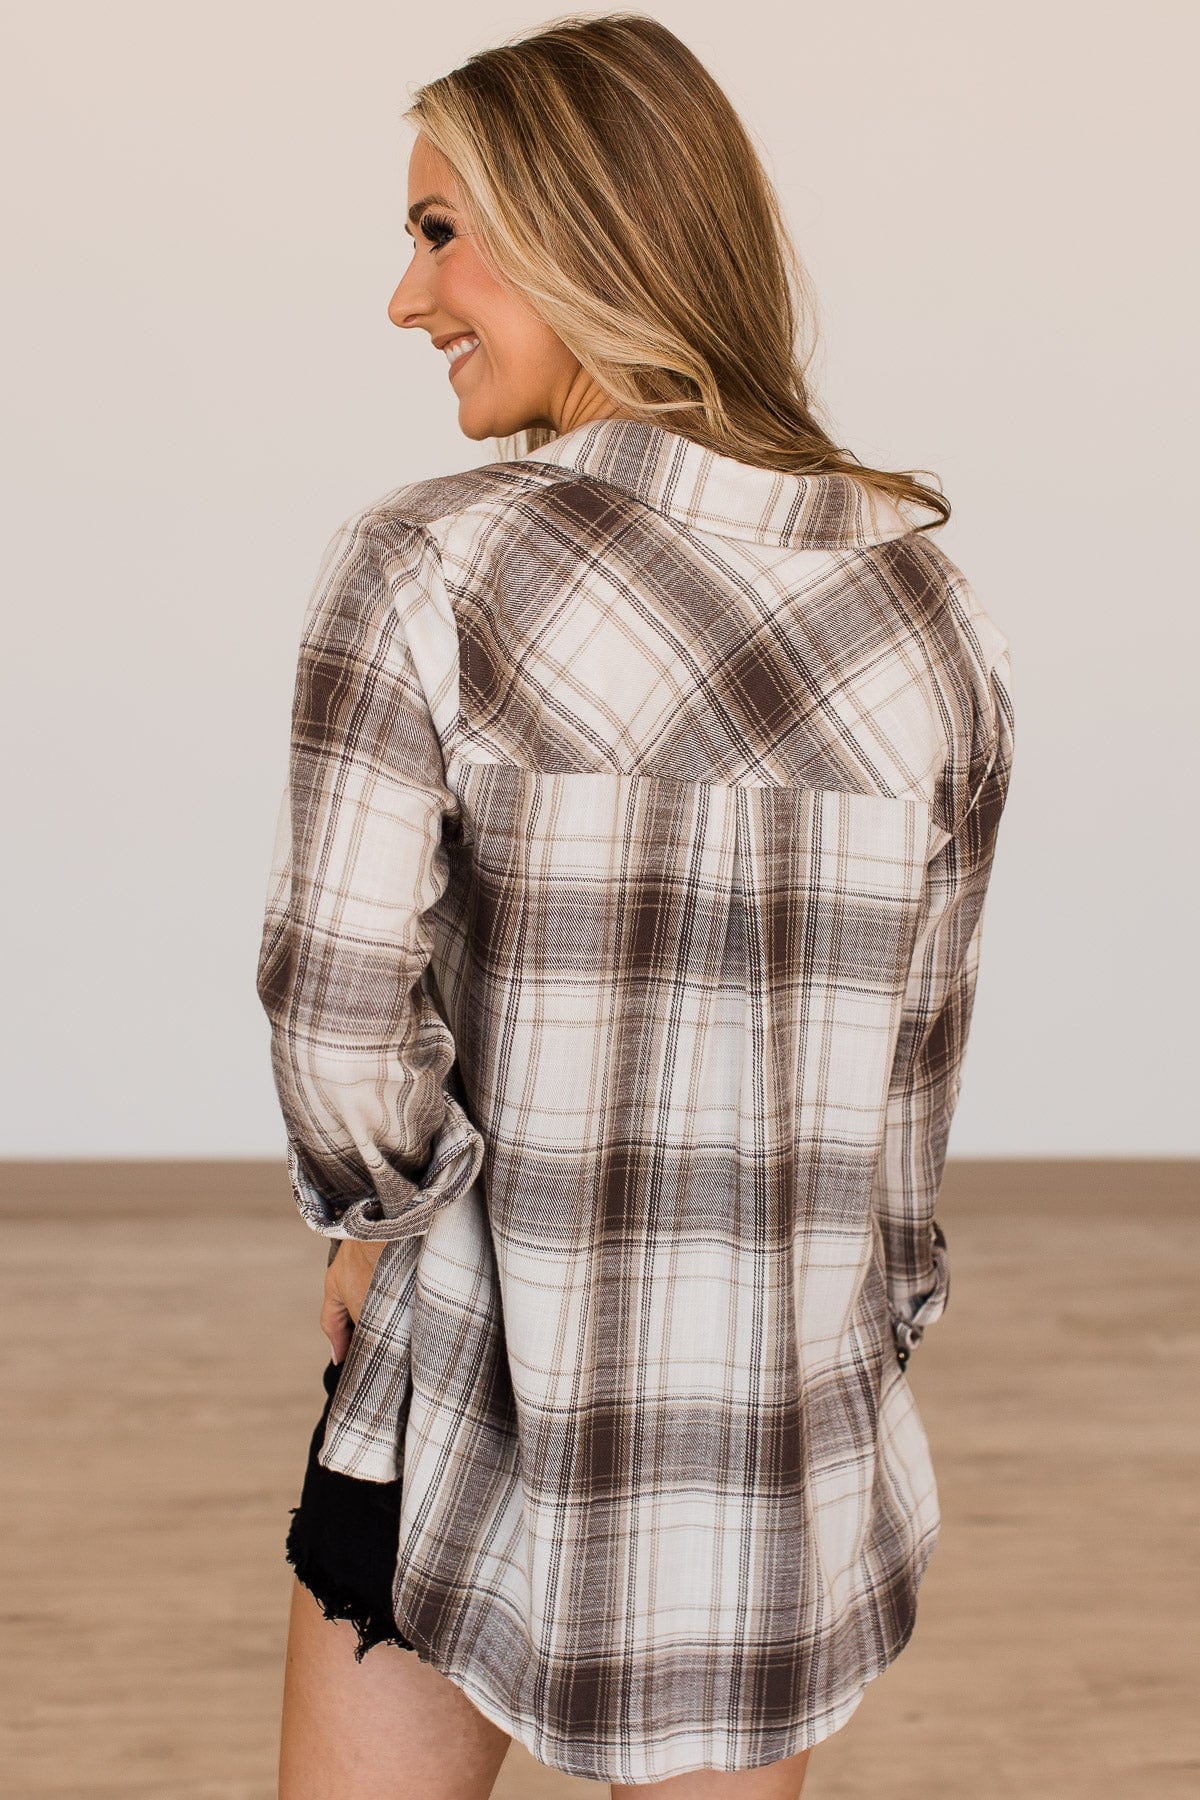 Make It Count Plaid Button Top- Ivory & Taupe